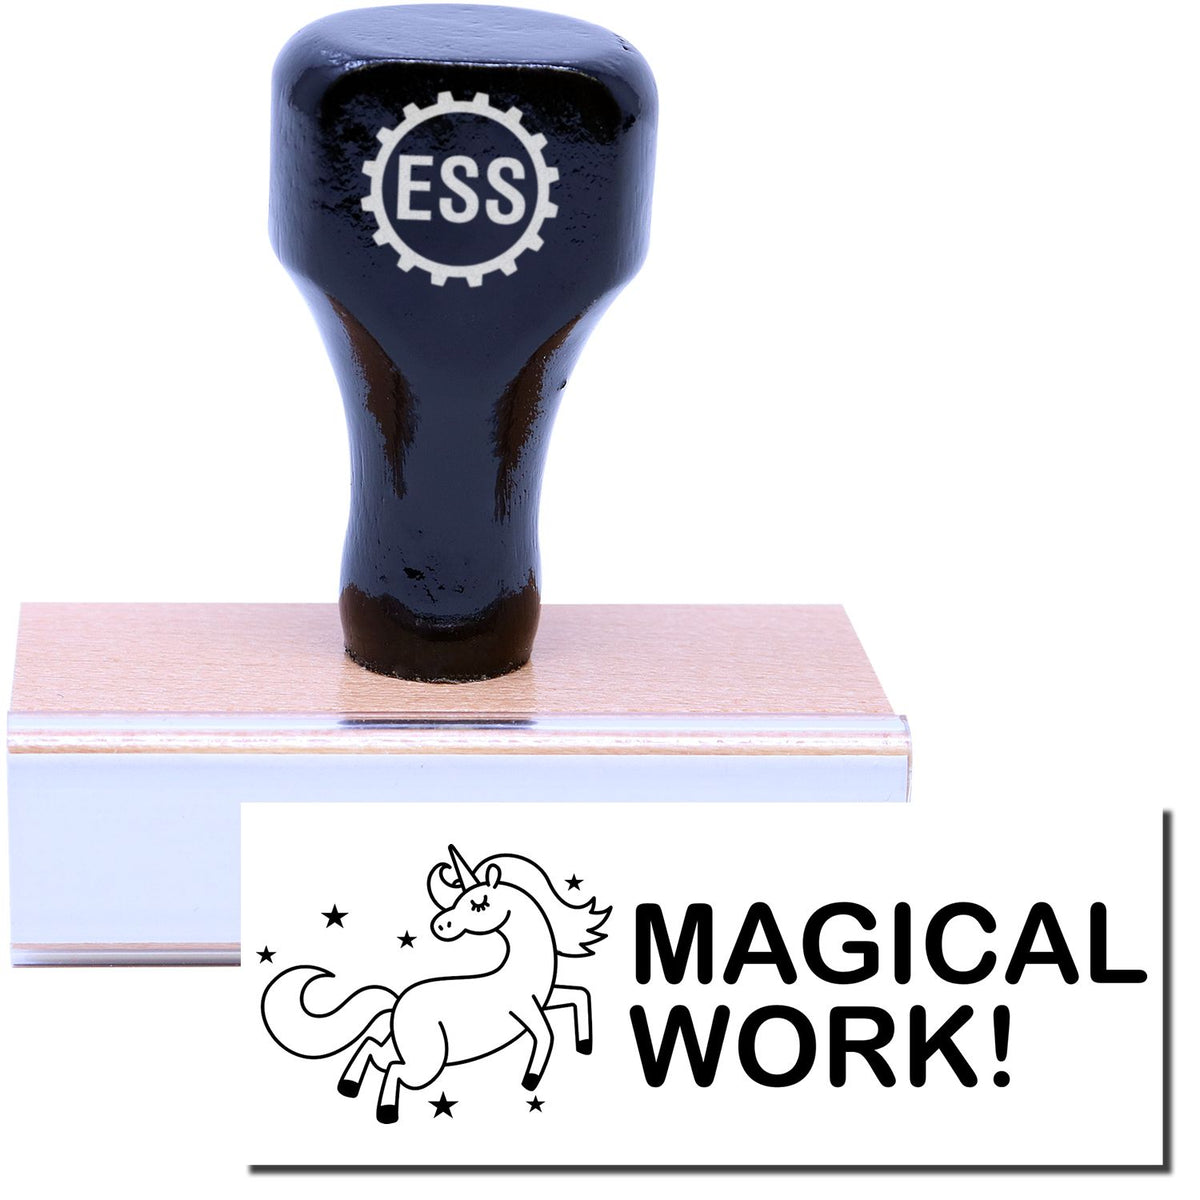 A stock office rubber stamp with a stamped image showing how the text &quot;MAGICAL WORK!&quot; with an image of a unicorn dancing among the stars is displayed after stamping.